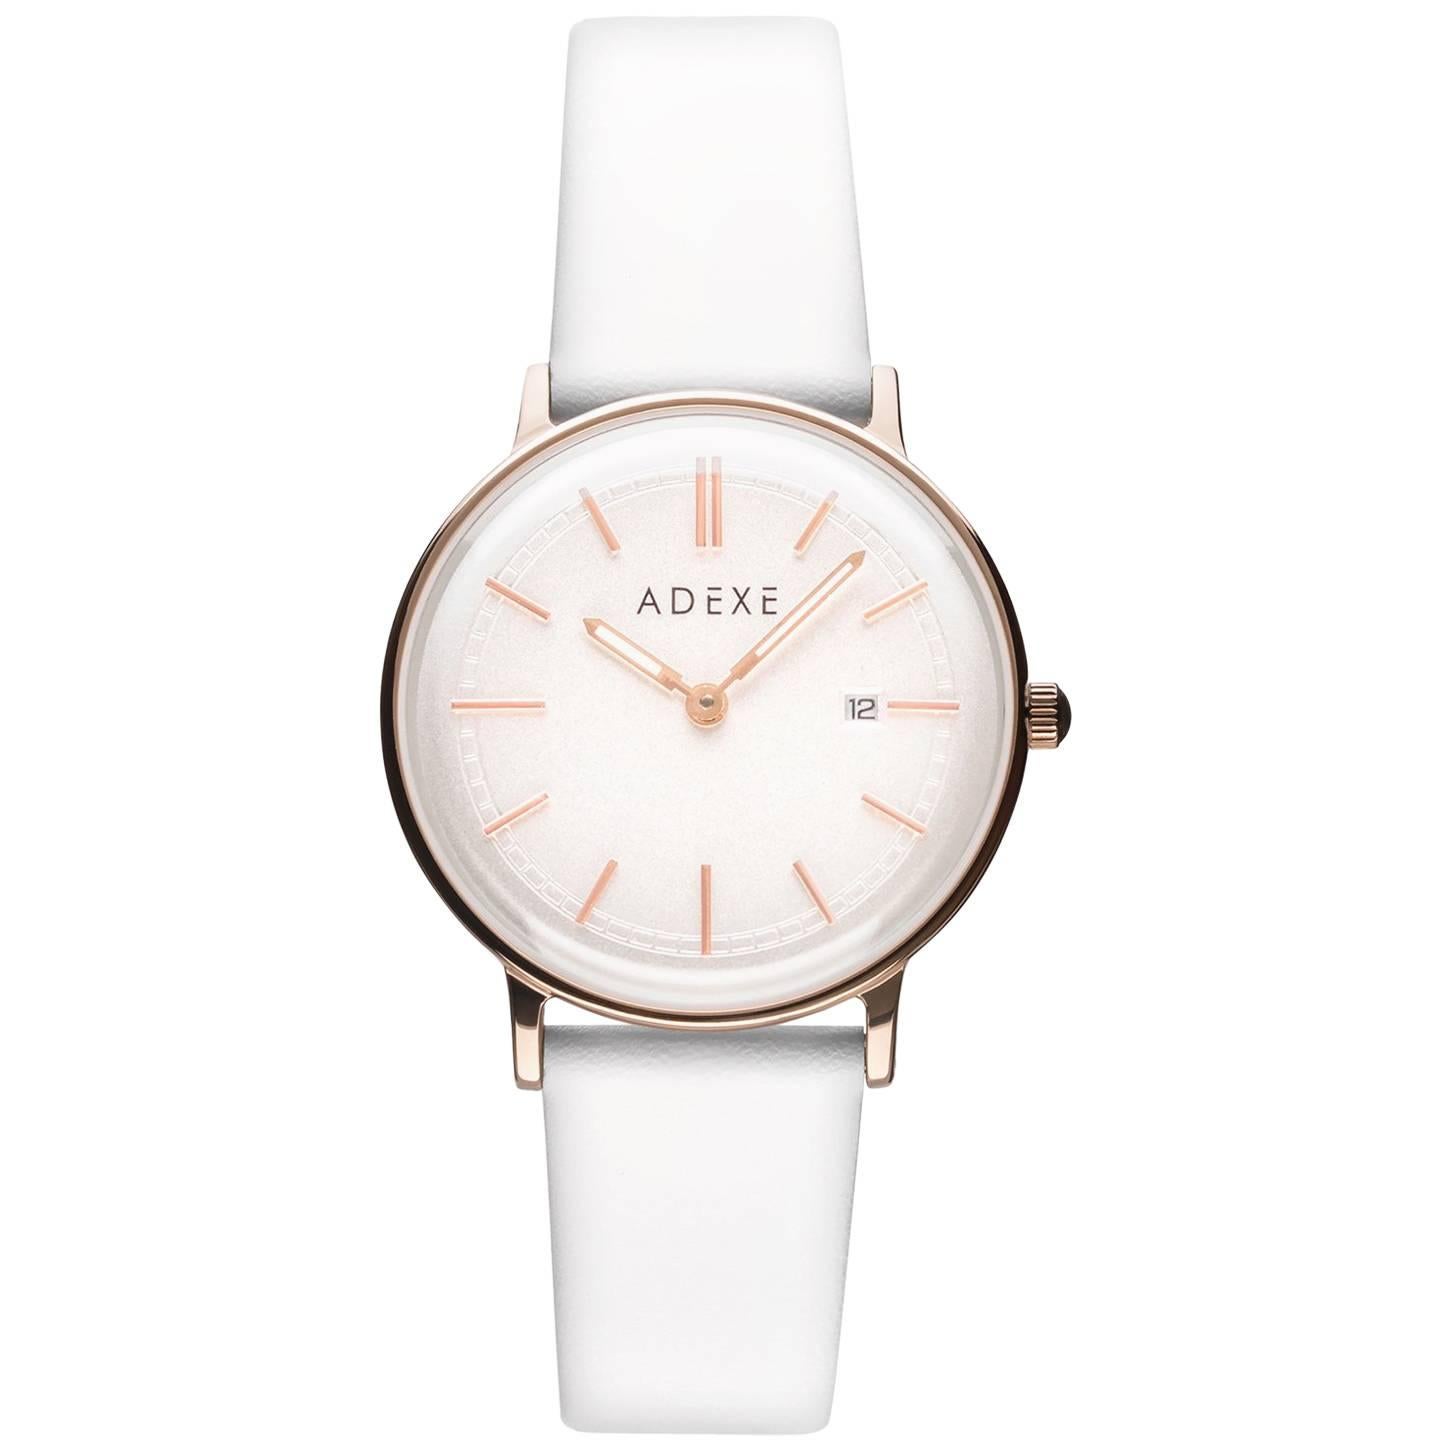 ADEXE British Designer Stainless Steel Meek White and Rosegold Quartz Watch For Sale